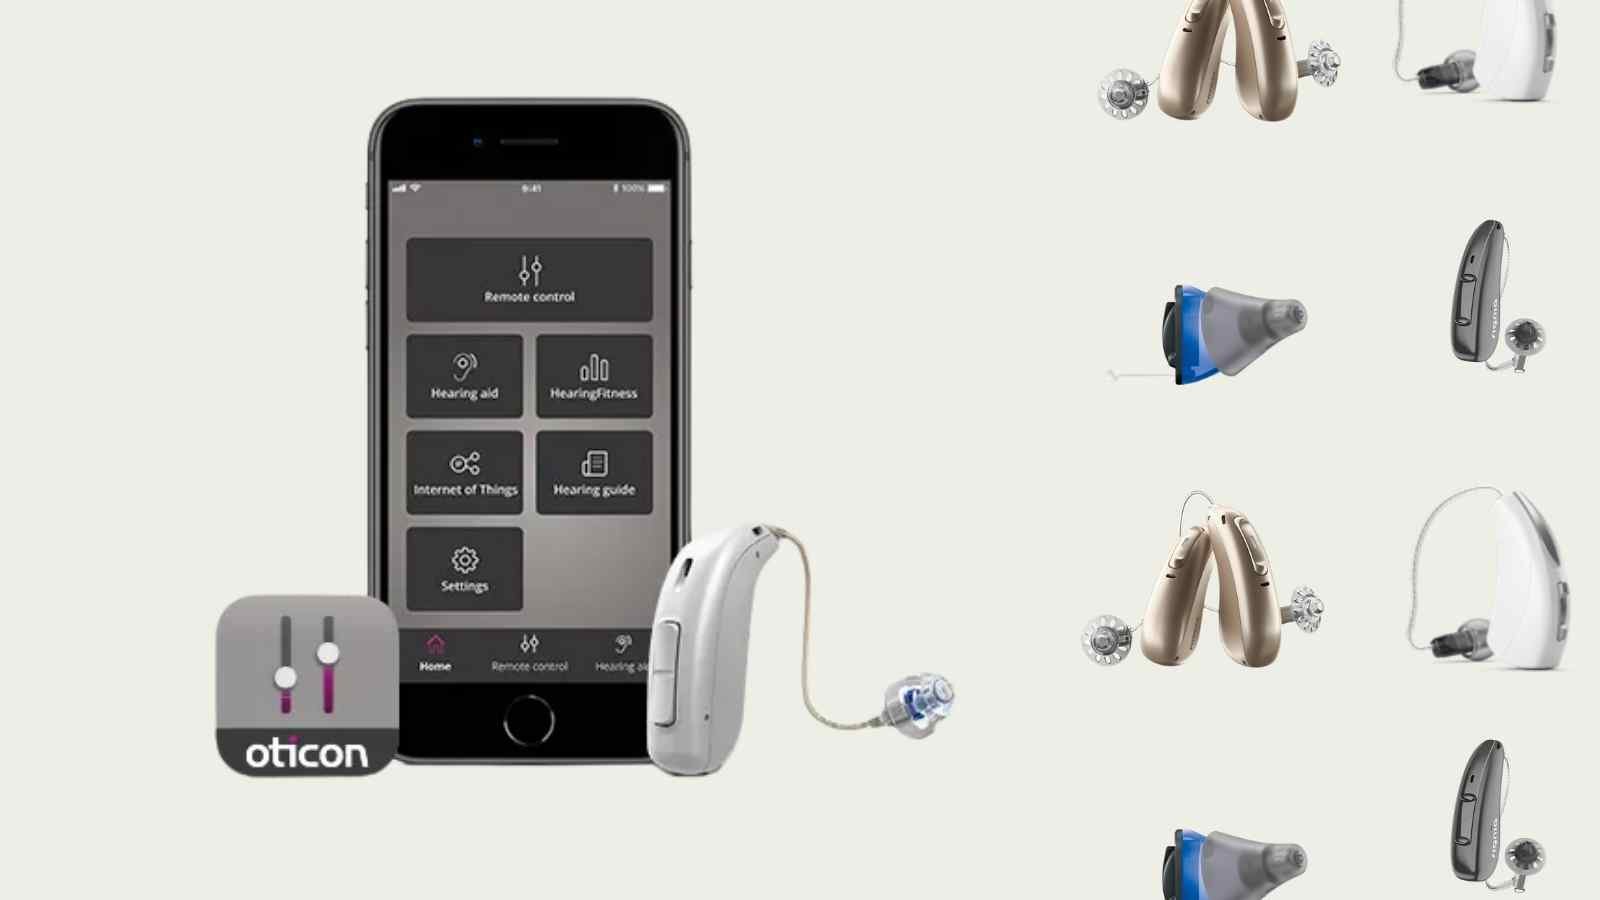 Image of the Oticon App and hearing aid compared to other brands